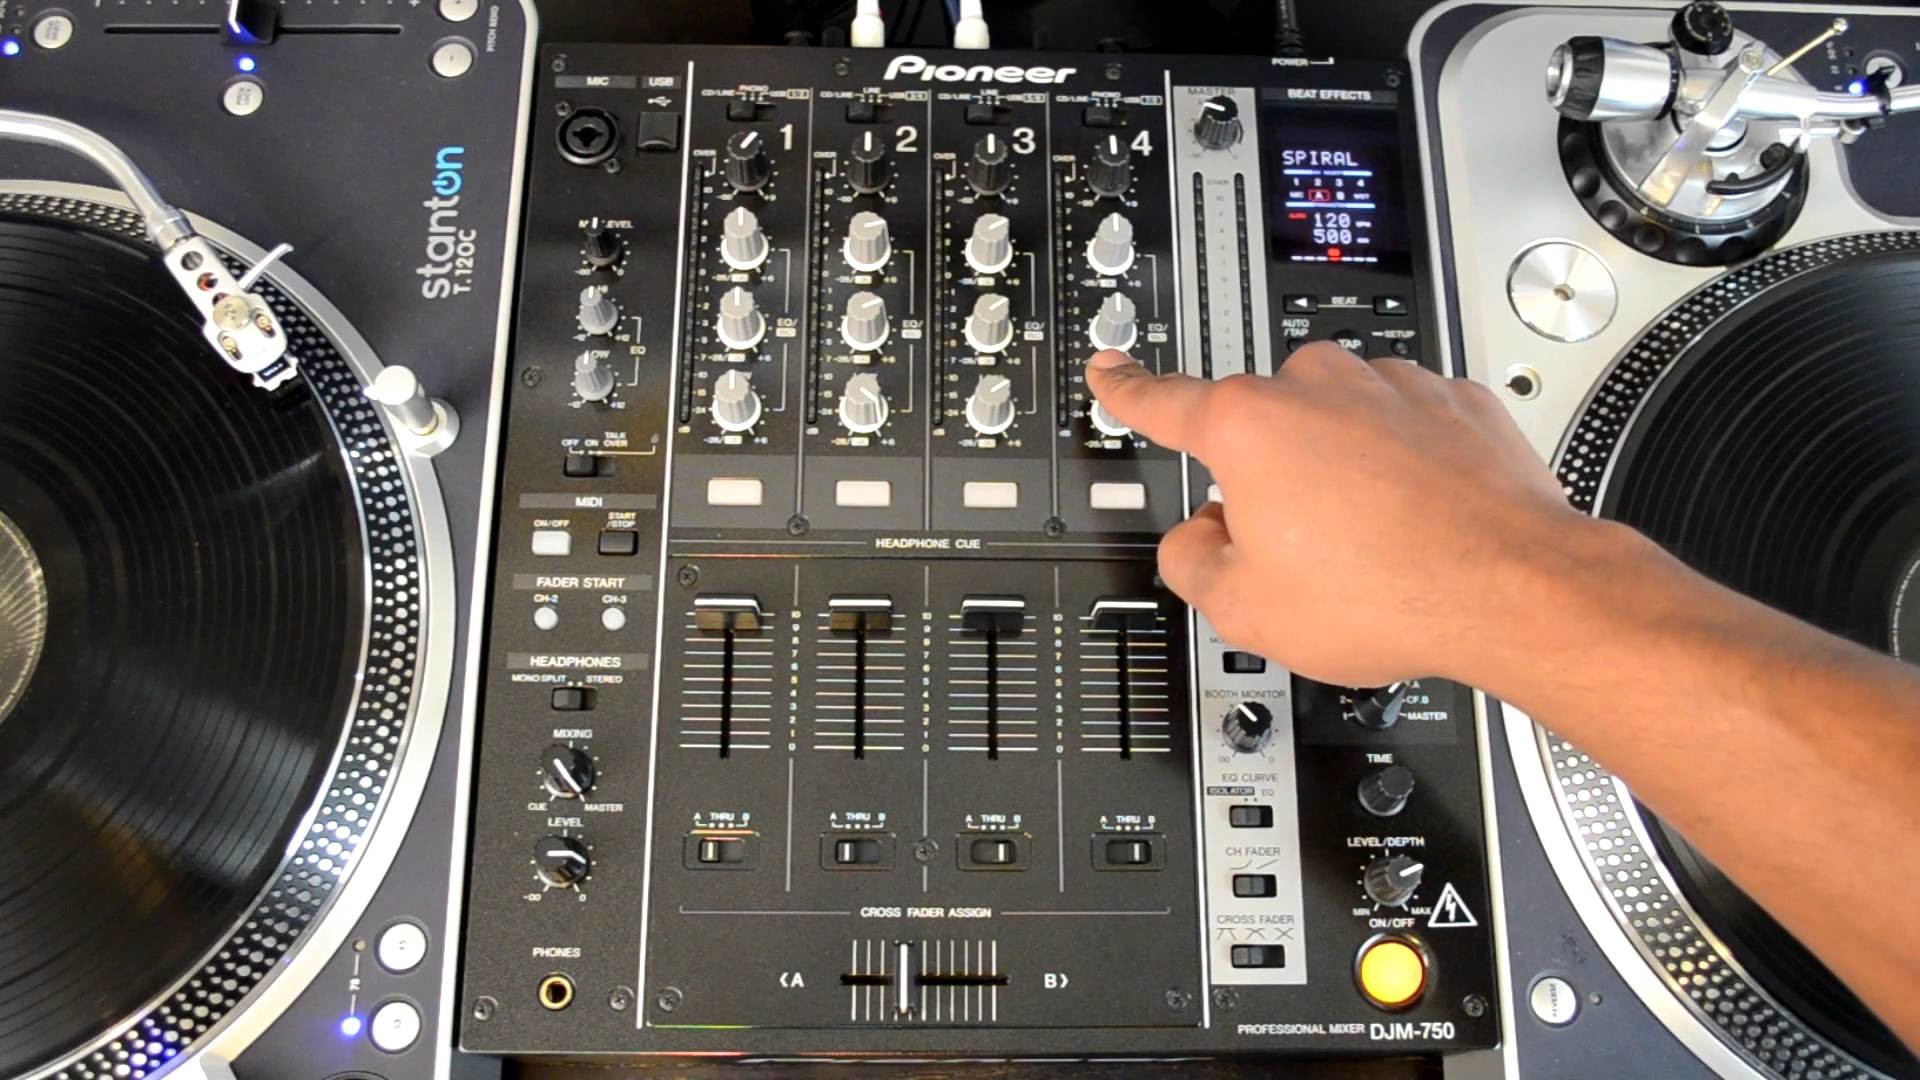 1920x1080 Pioneer DJM-750 Four-Channel Professional DJ Mixer HD-Video Review - YouTube